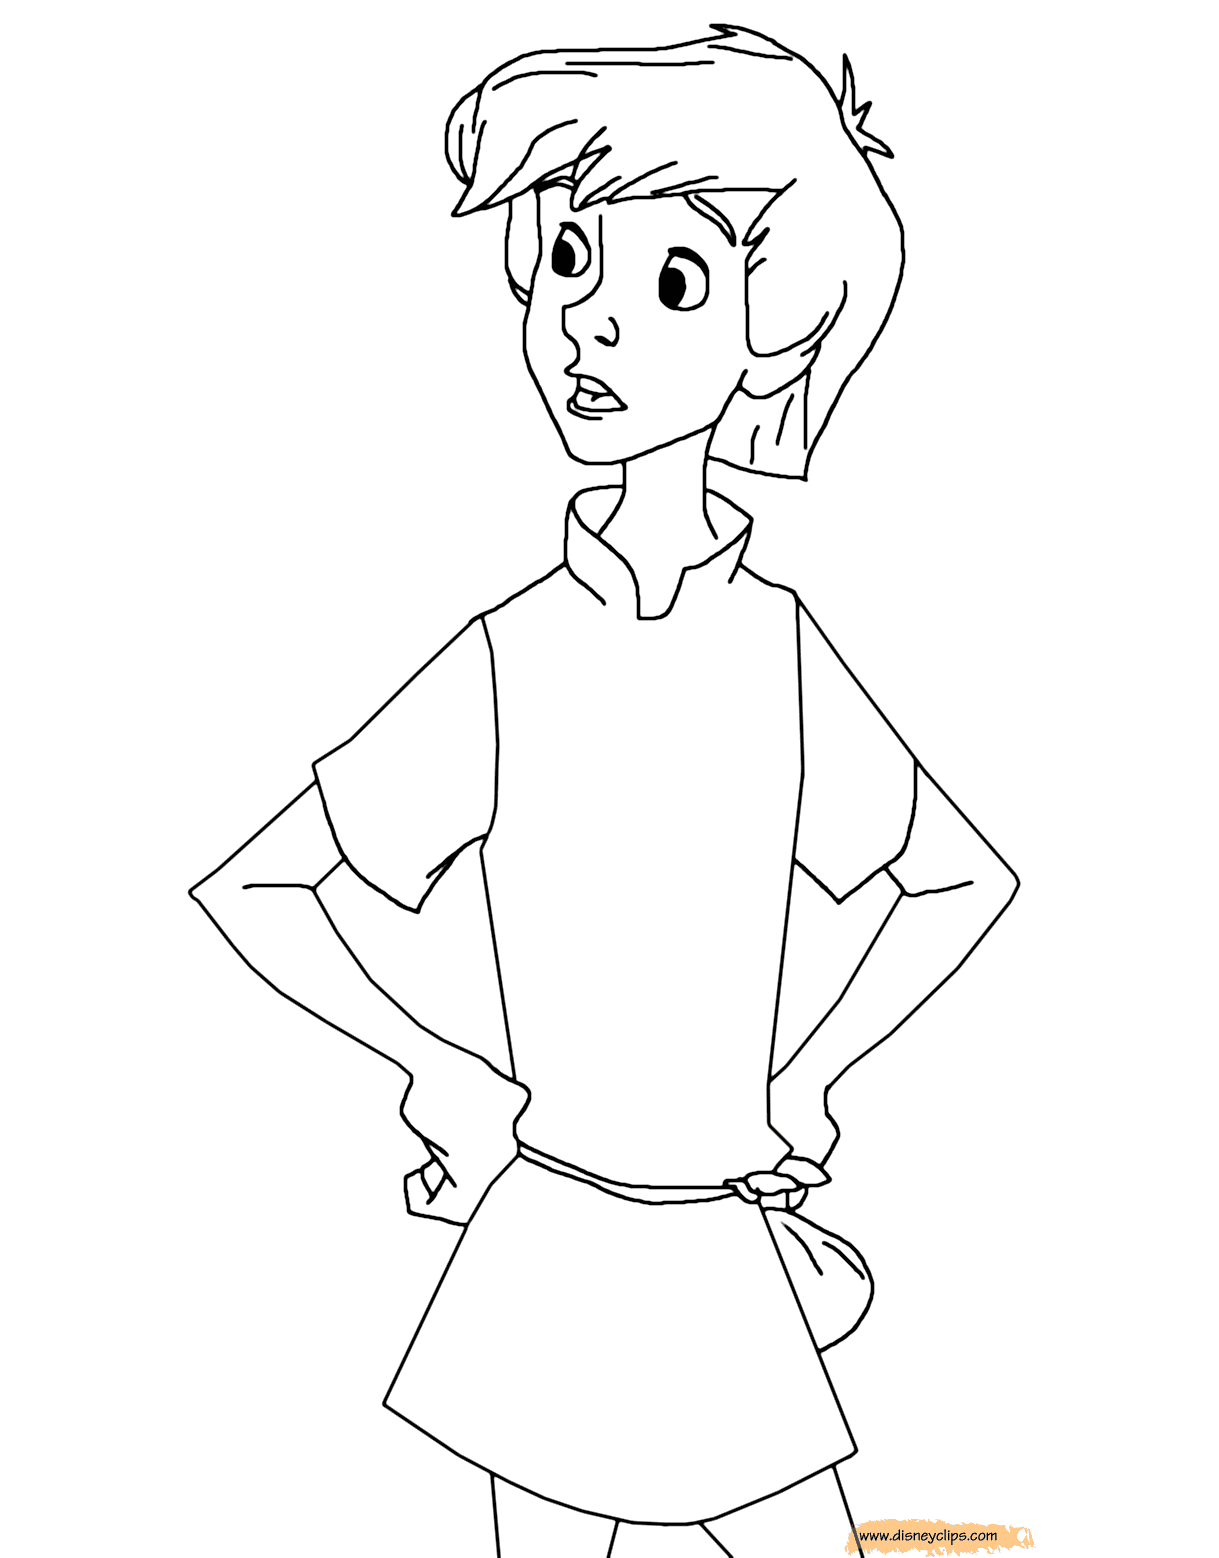 Wart Coloring Page